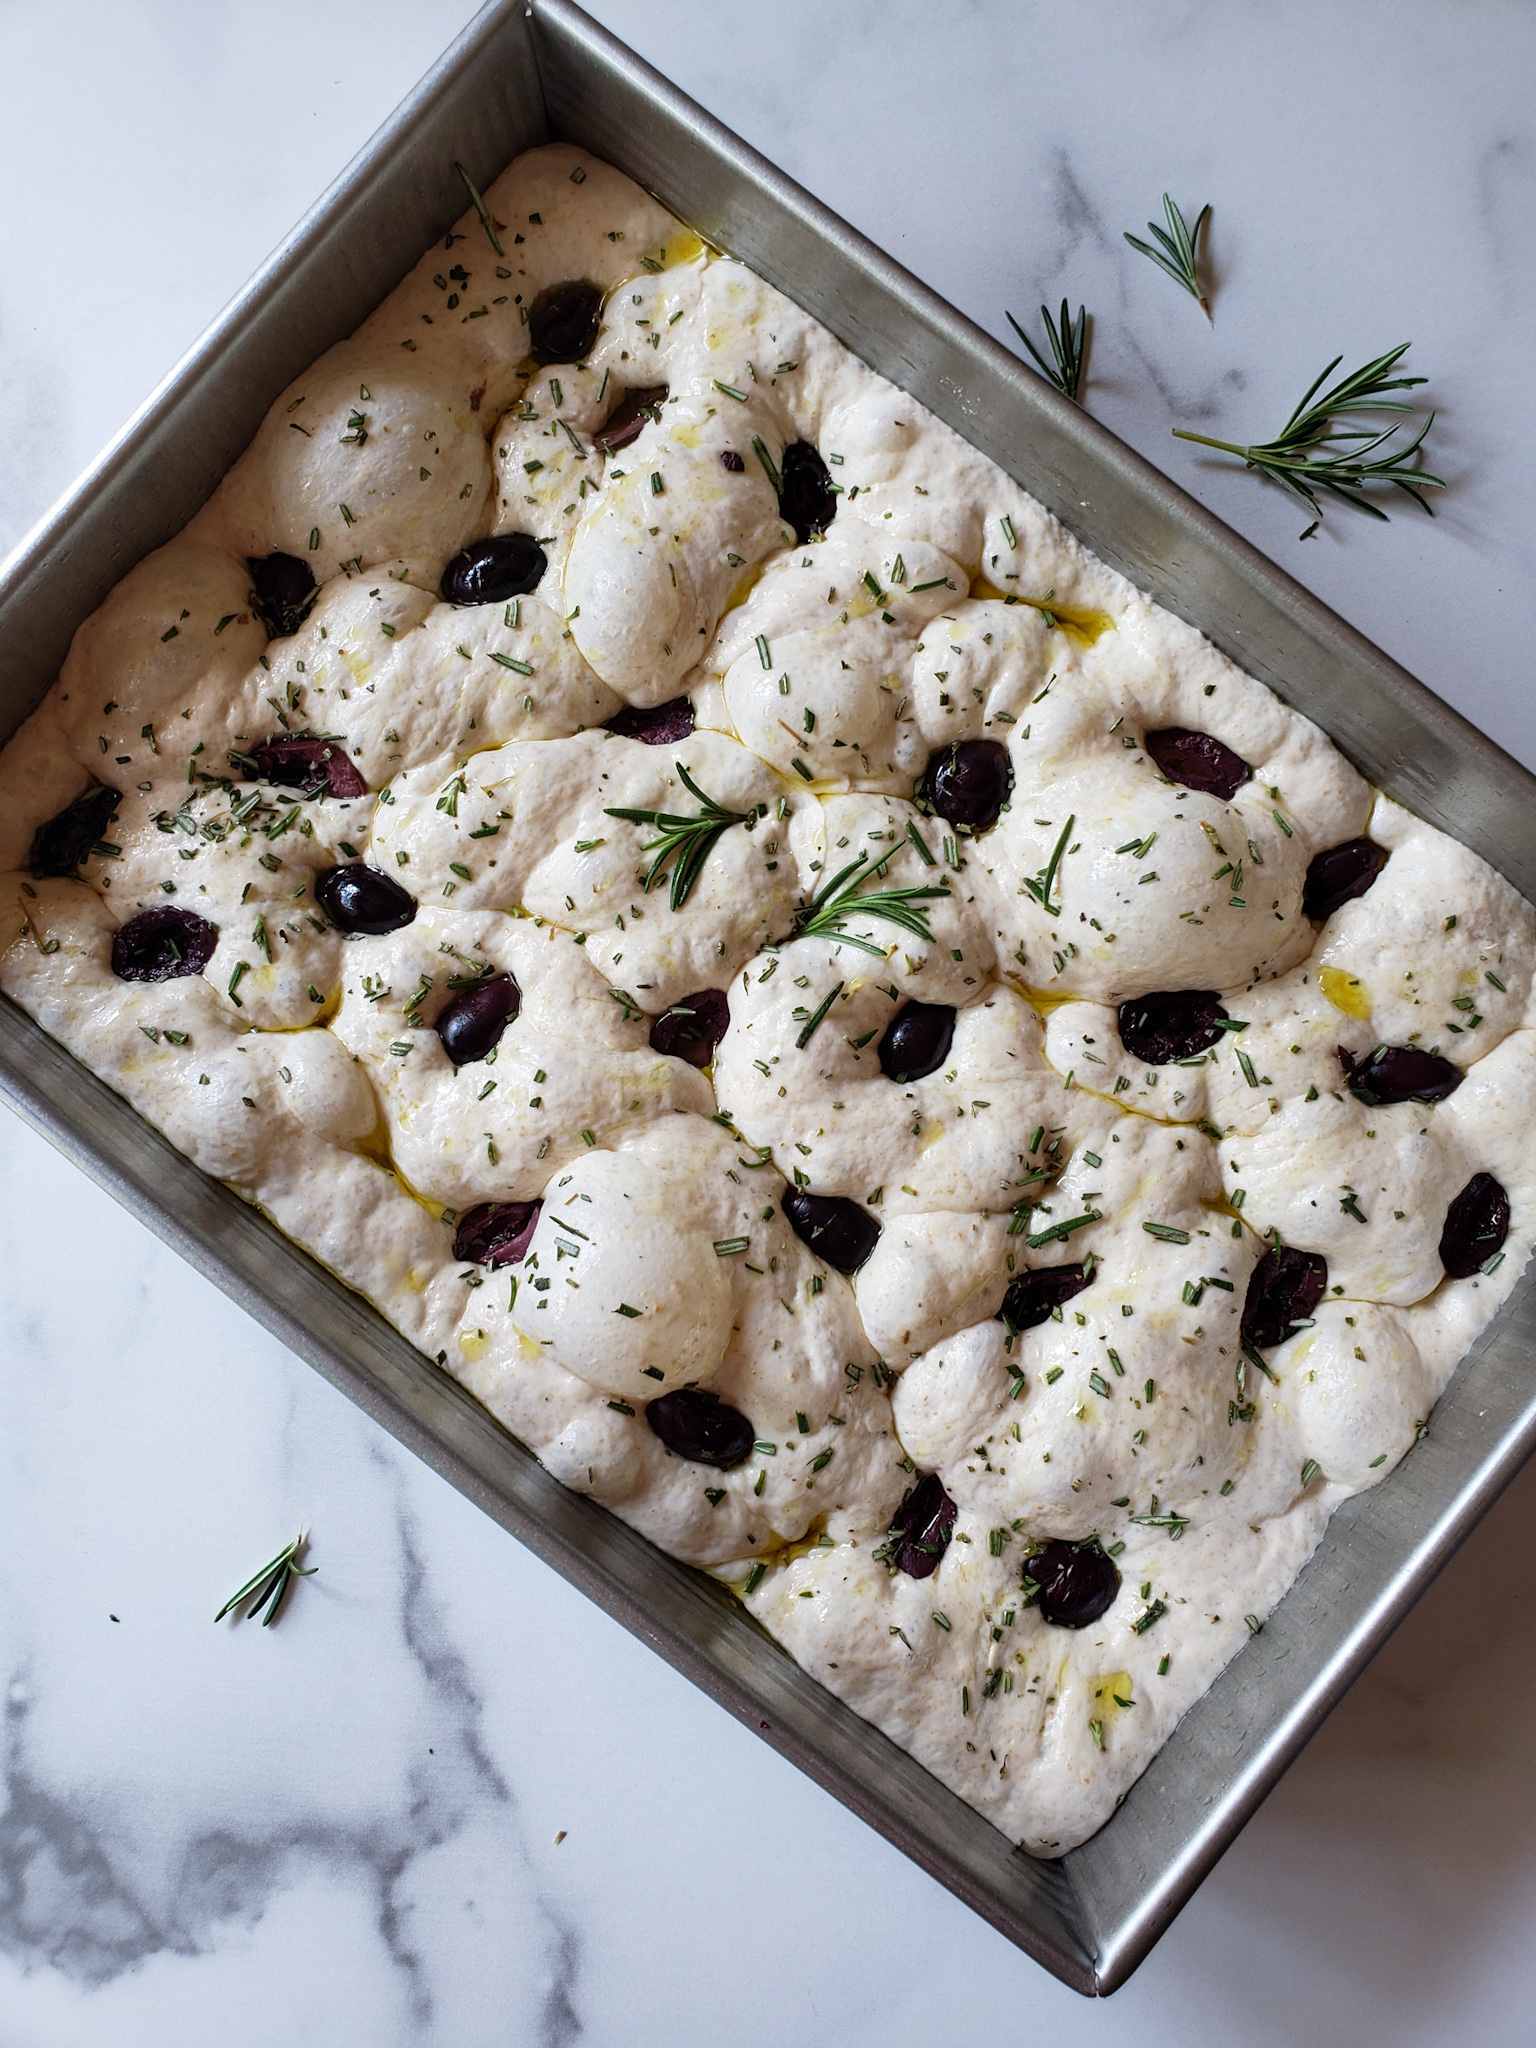 A baking pan full of sourdough focaccia that has been dressed with olive oil, coarse sea salt, kalamata olives, and fresh chopped rosemary is shown. The next step is to bake it!